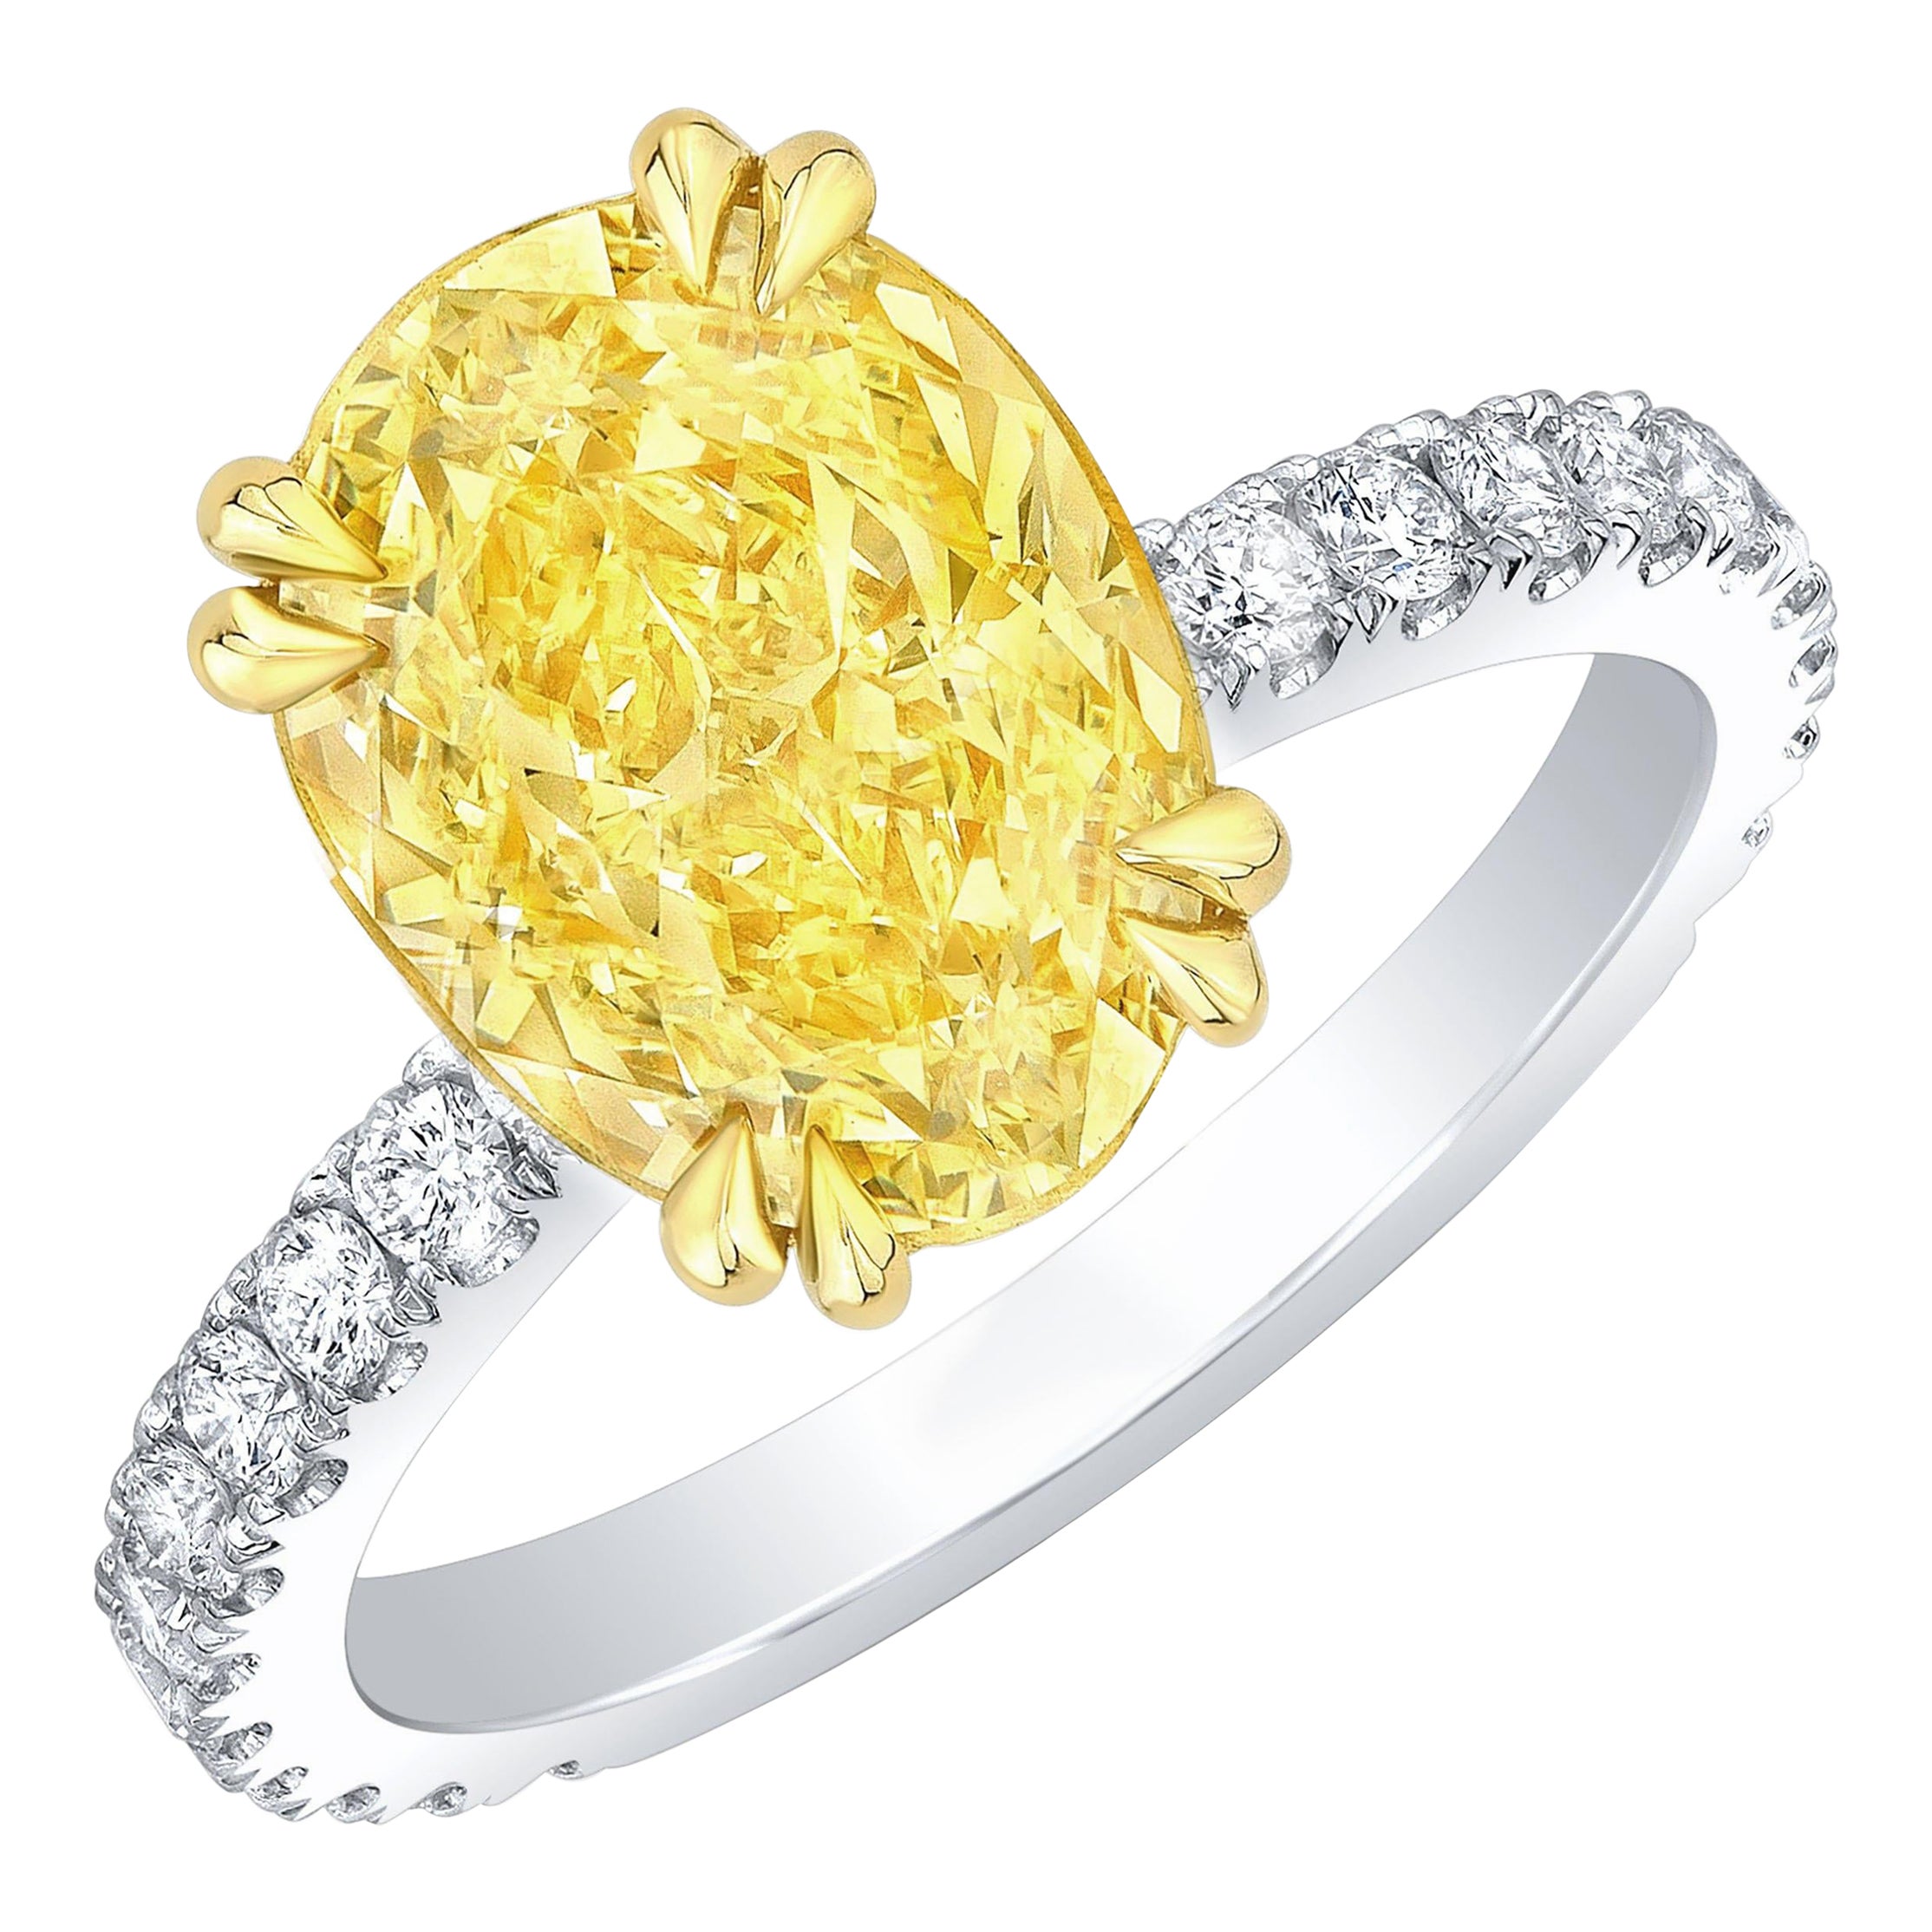 2.90ct Canary Fancy Light Yellow Oval Hidden Halo Engagement Ring VVS1 GIA For Sale